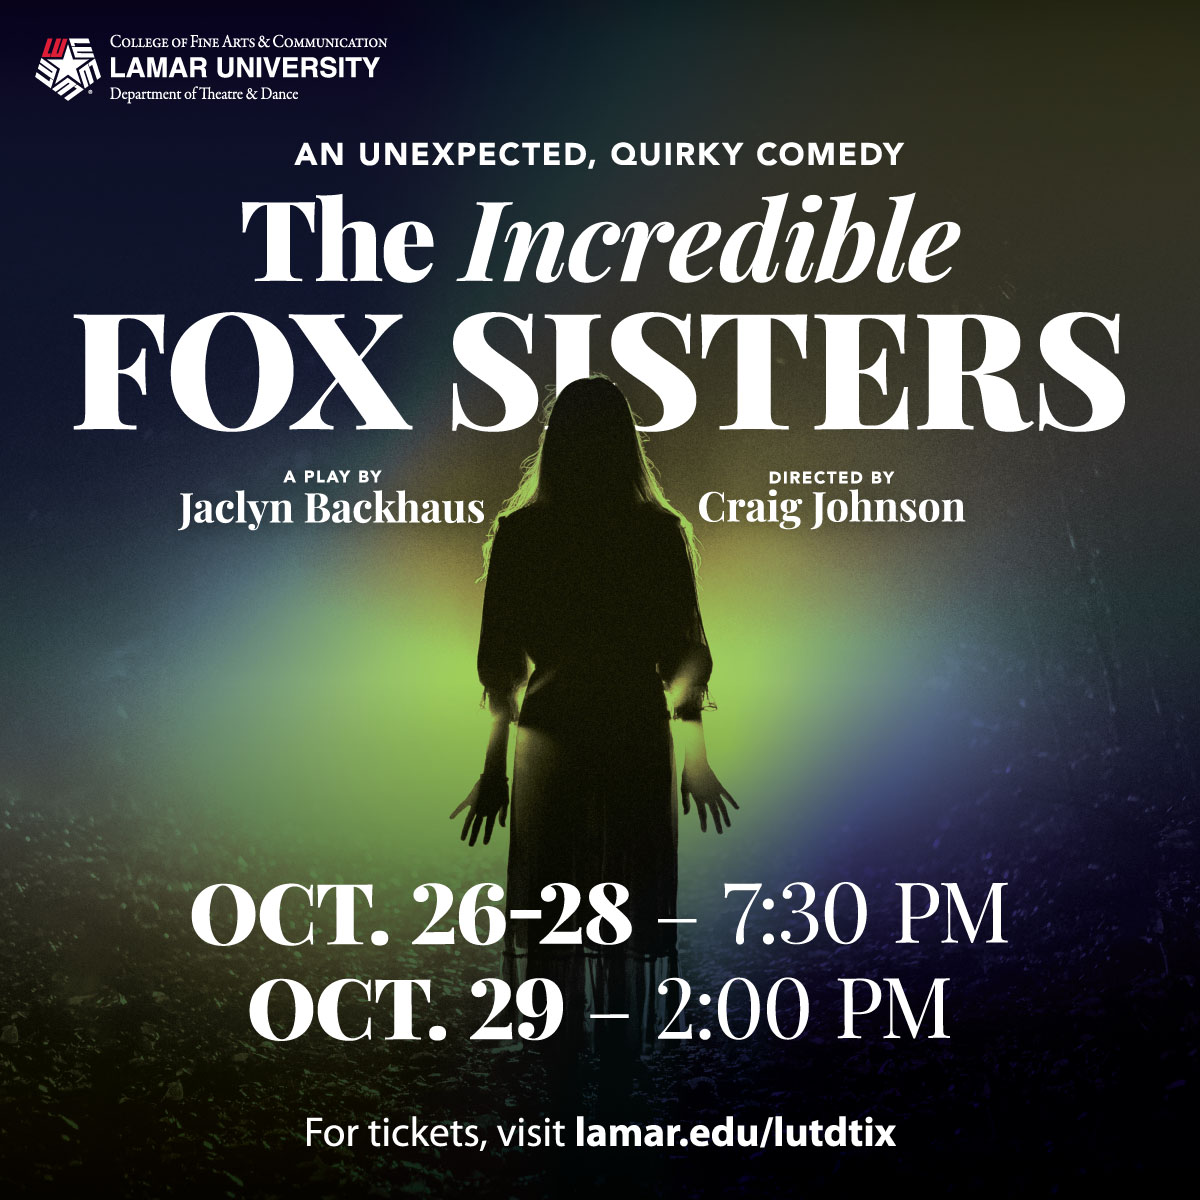 The Incredible Fox Sisters - purchase your tickets today